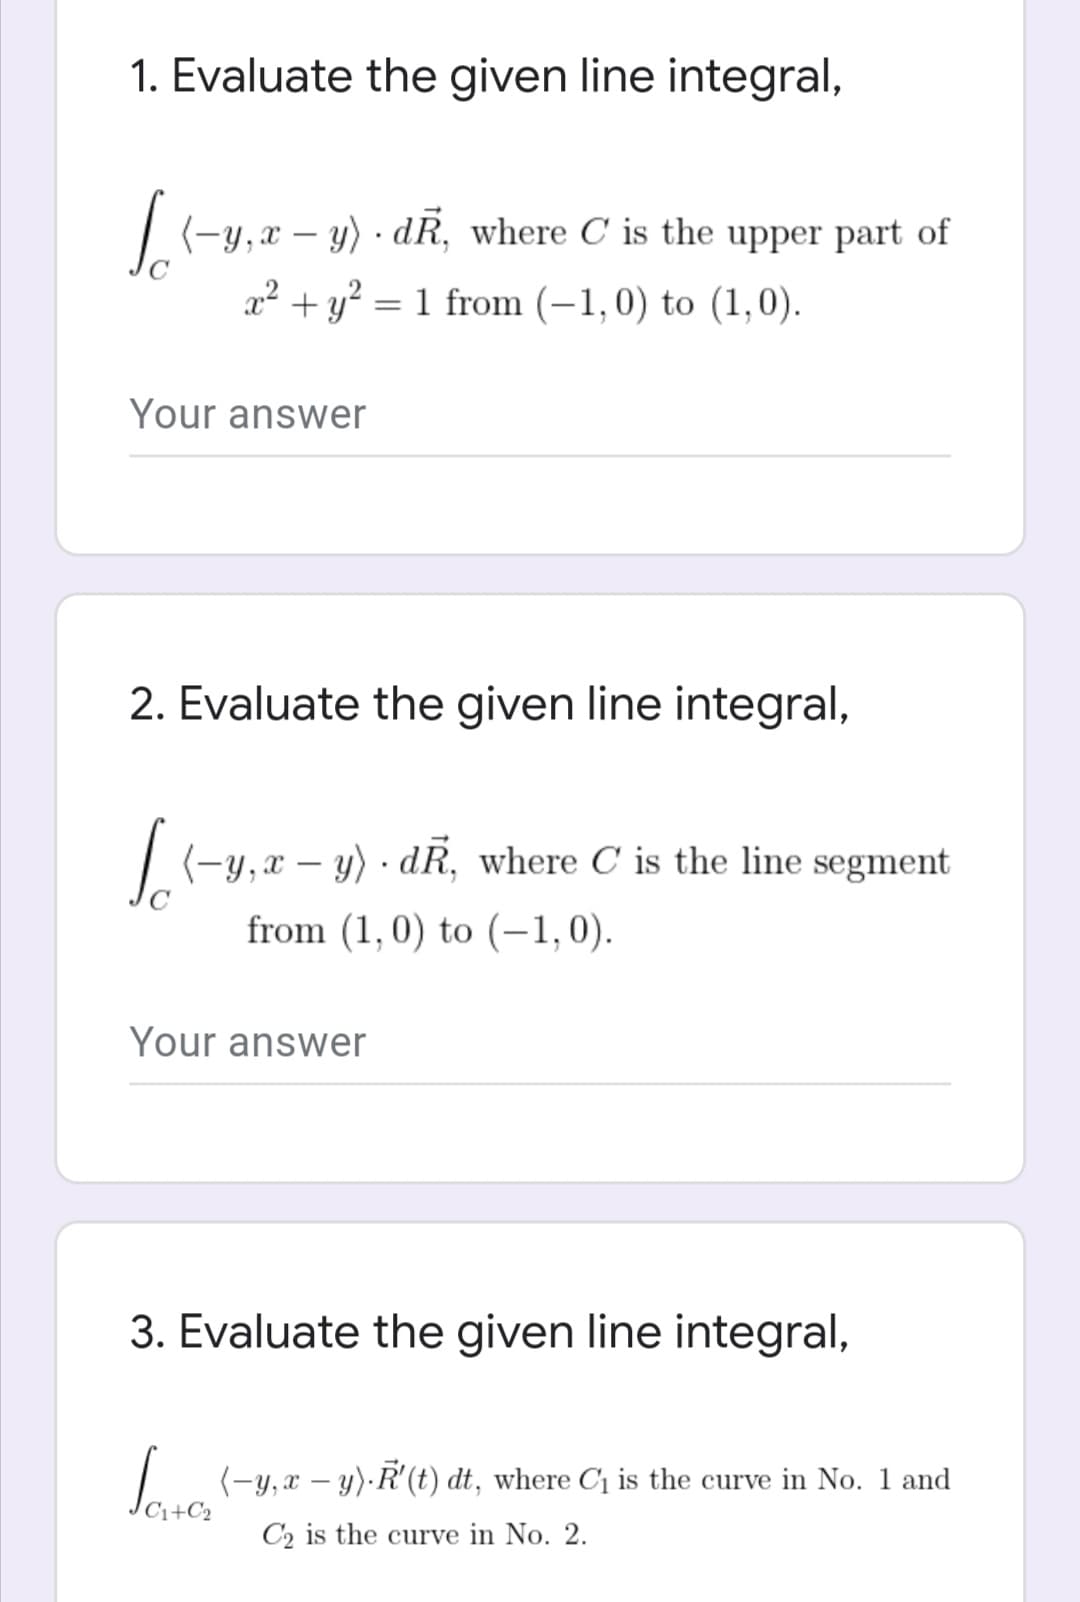 1. Evaluate the given line integral,
(-y,x – y) · dR, where C is the upper part of
x² + y? = 1 from (–1,0) to (1,0).
Your answer
2. Evaluate the given line integral,
| (-y,x – y) · dR, where C is the line segment
from (1,0) to (–1,0).
Your answer
3. Evaluate the given line integral,
I (-y, a – y)·R'(t) dt, where C is the curve in No. 1 and
C2 is the curve in No. 2.
